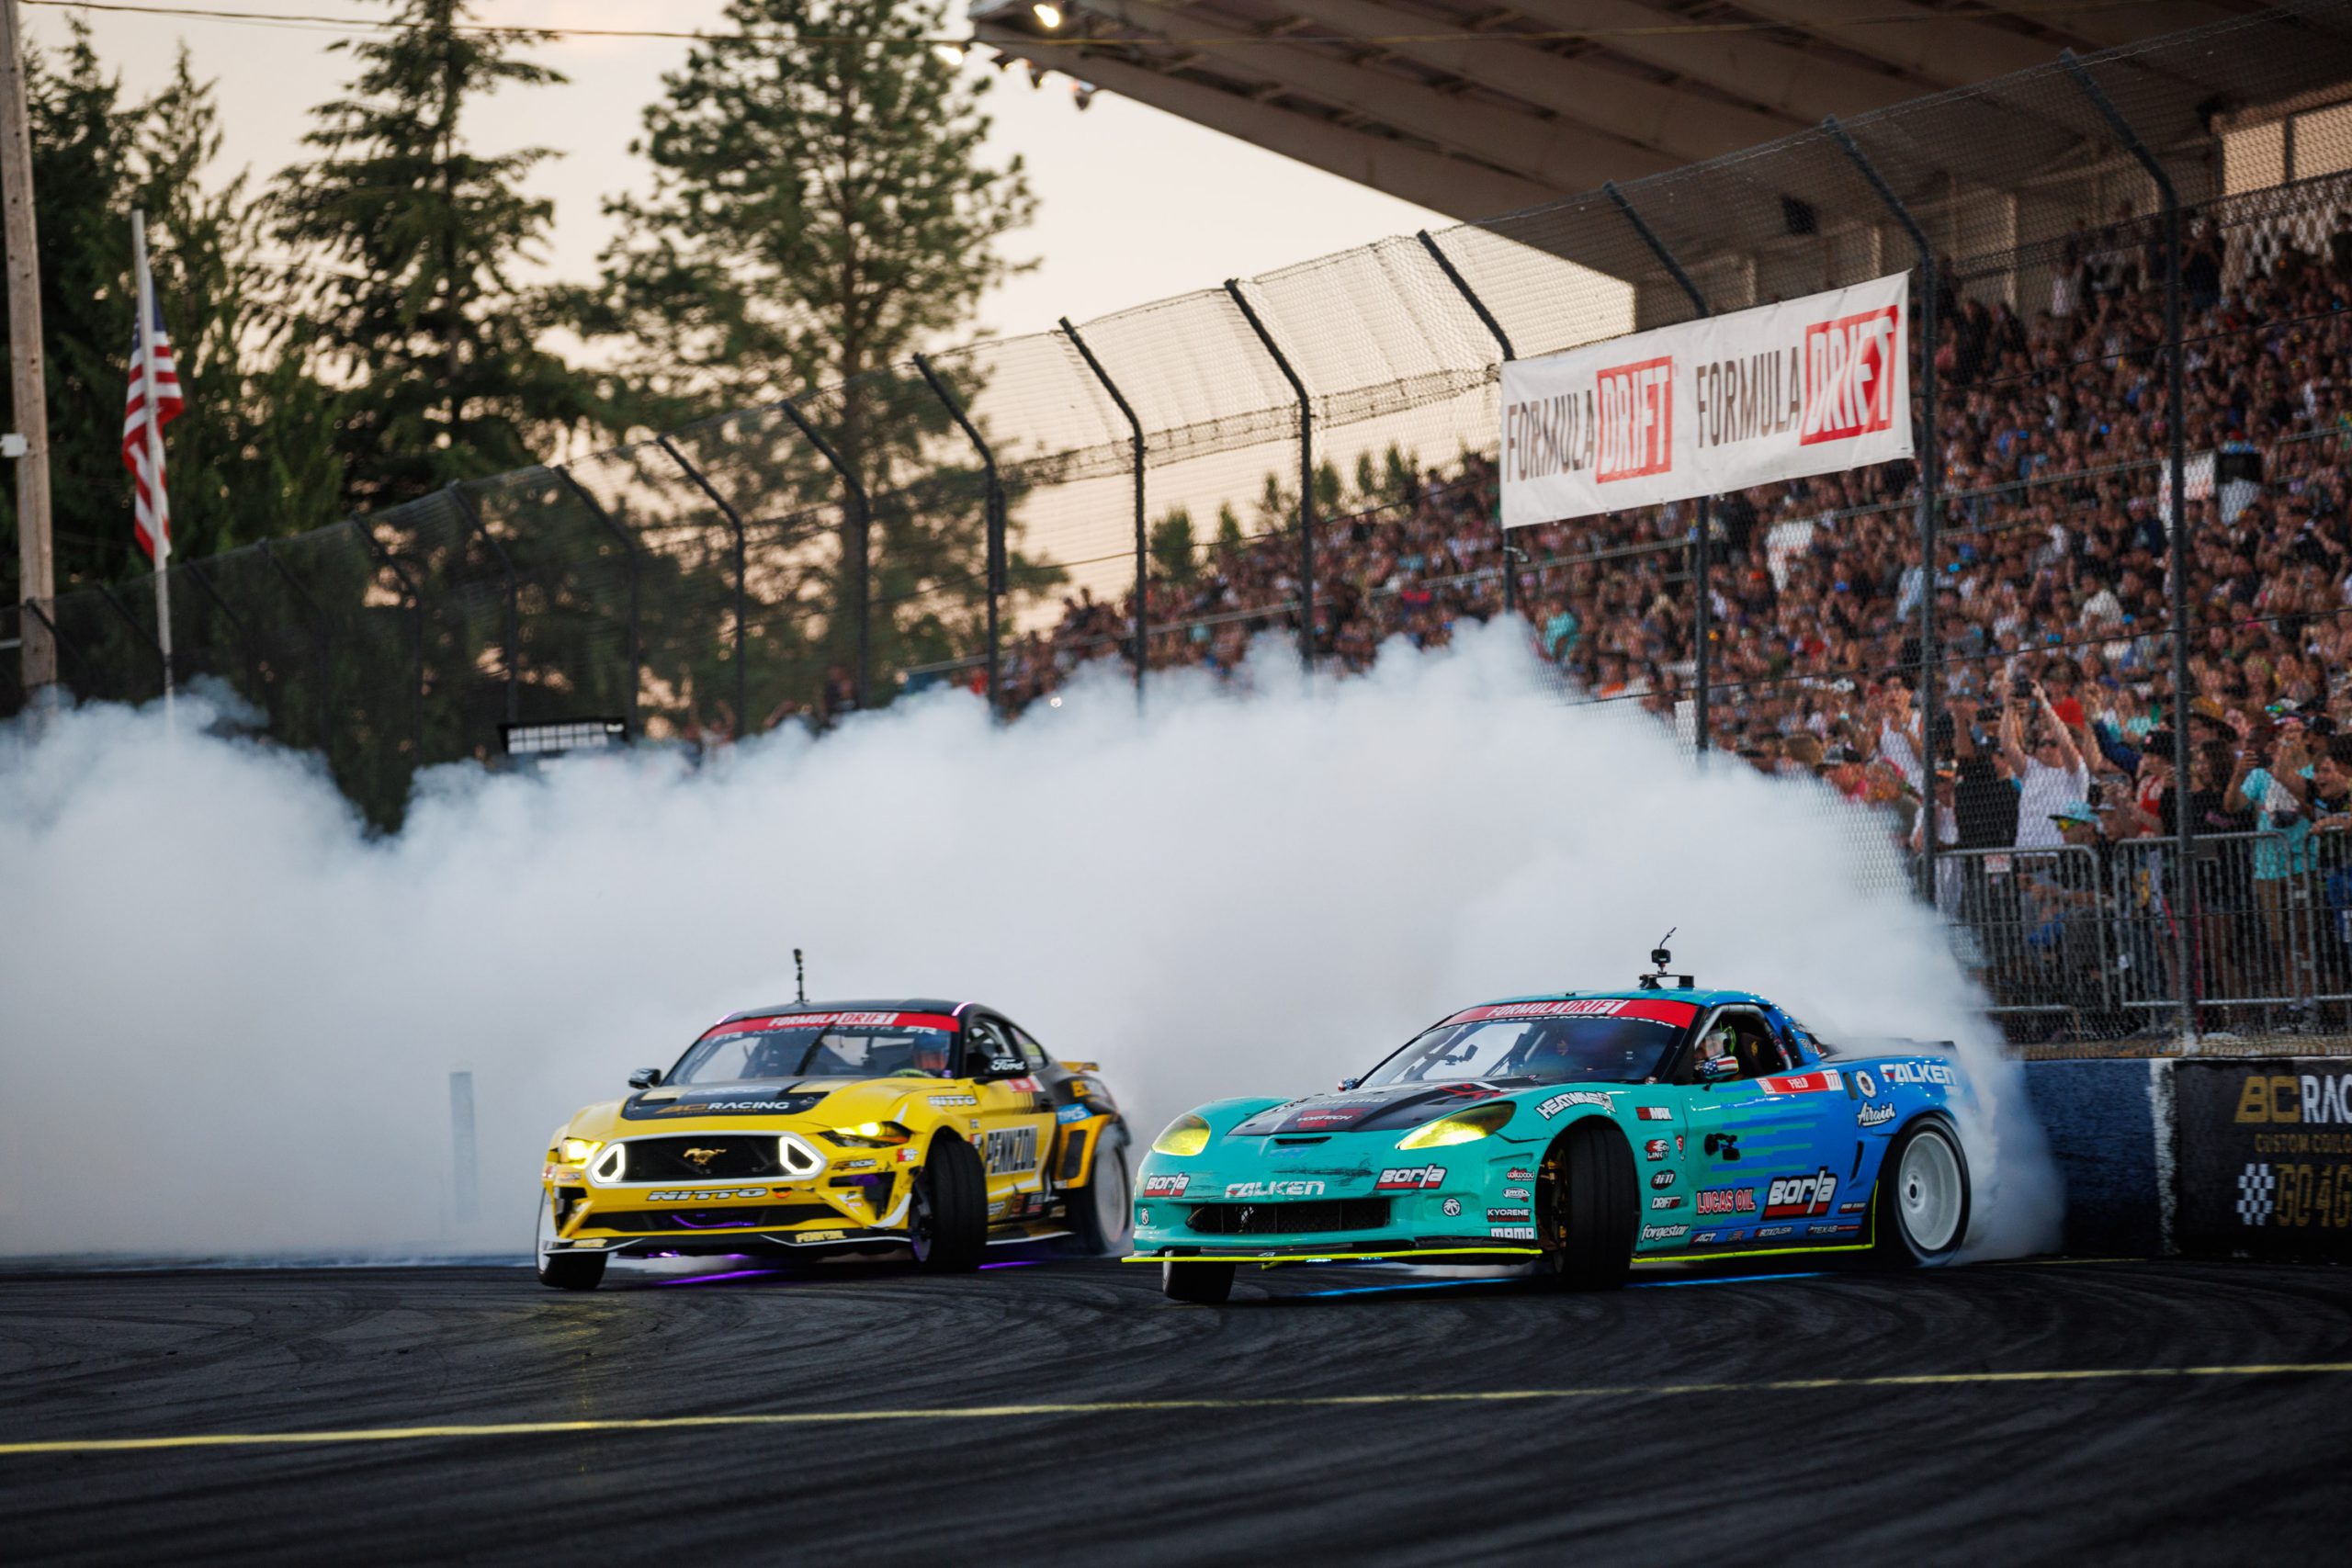 COMPETITION RESULTS FROM ROUND 6 OF 2022 FORMULA DRIFT PRO CHAMPIONSHIP